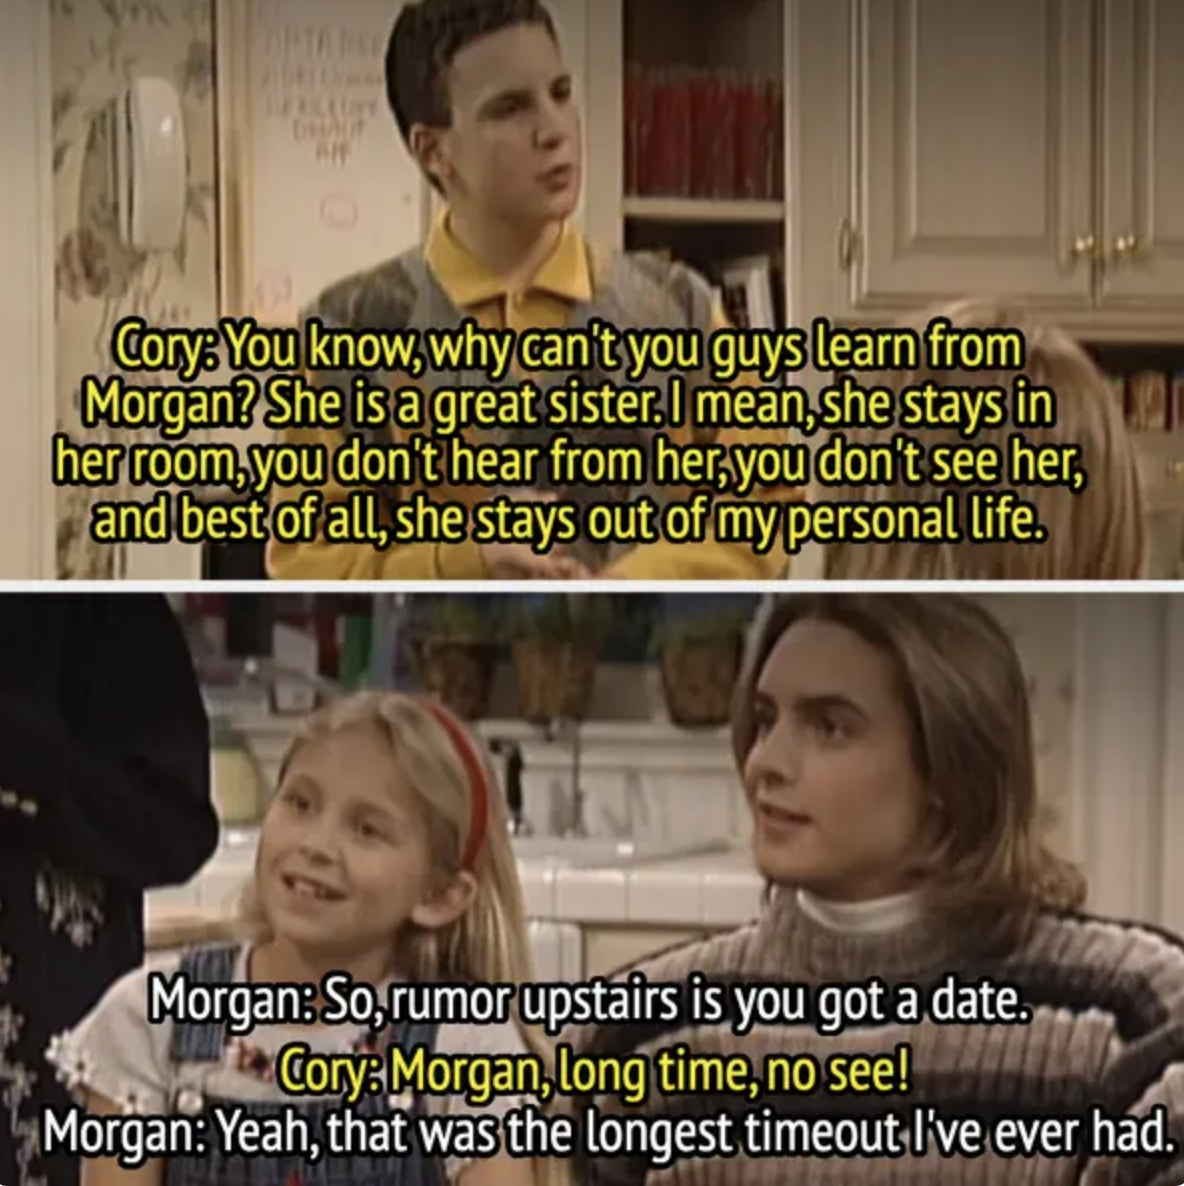 in a scene, Cory says Morgan is a great sister because she stays upstairs and out of his personal life, and Morgan says she just got out of the longest timeout she&#x27;s ever had